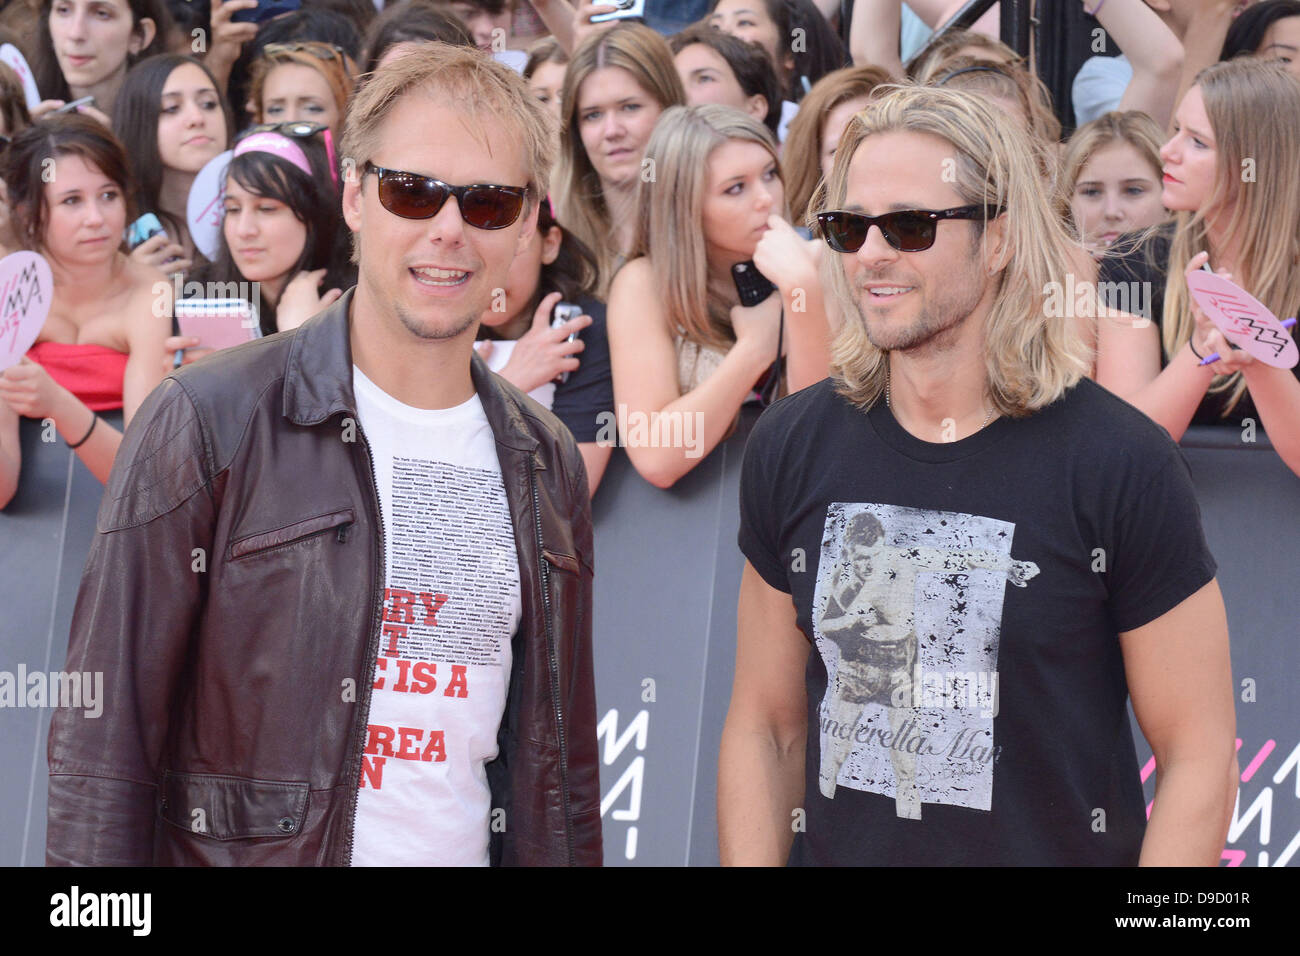 Toronto, Canada. June 16, 2013. The 2013 MuchMusic Video Awards arrival. In picture, Armin ban Burren and Trevor Guthrie (Credit: EXImages/Alamy Live News) Stock Photo